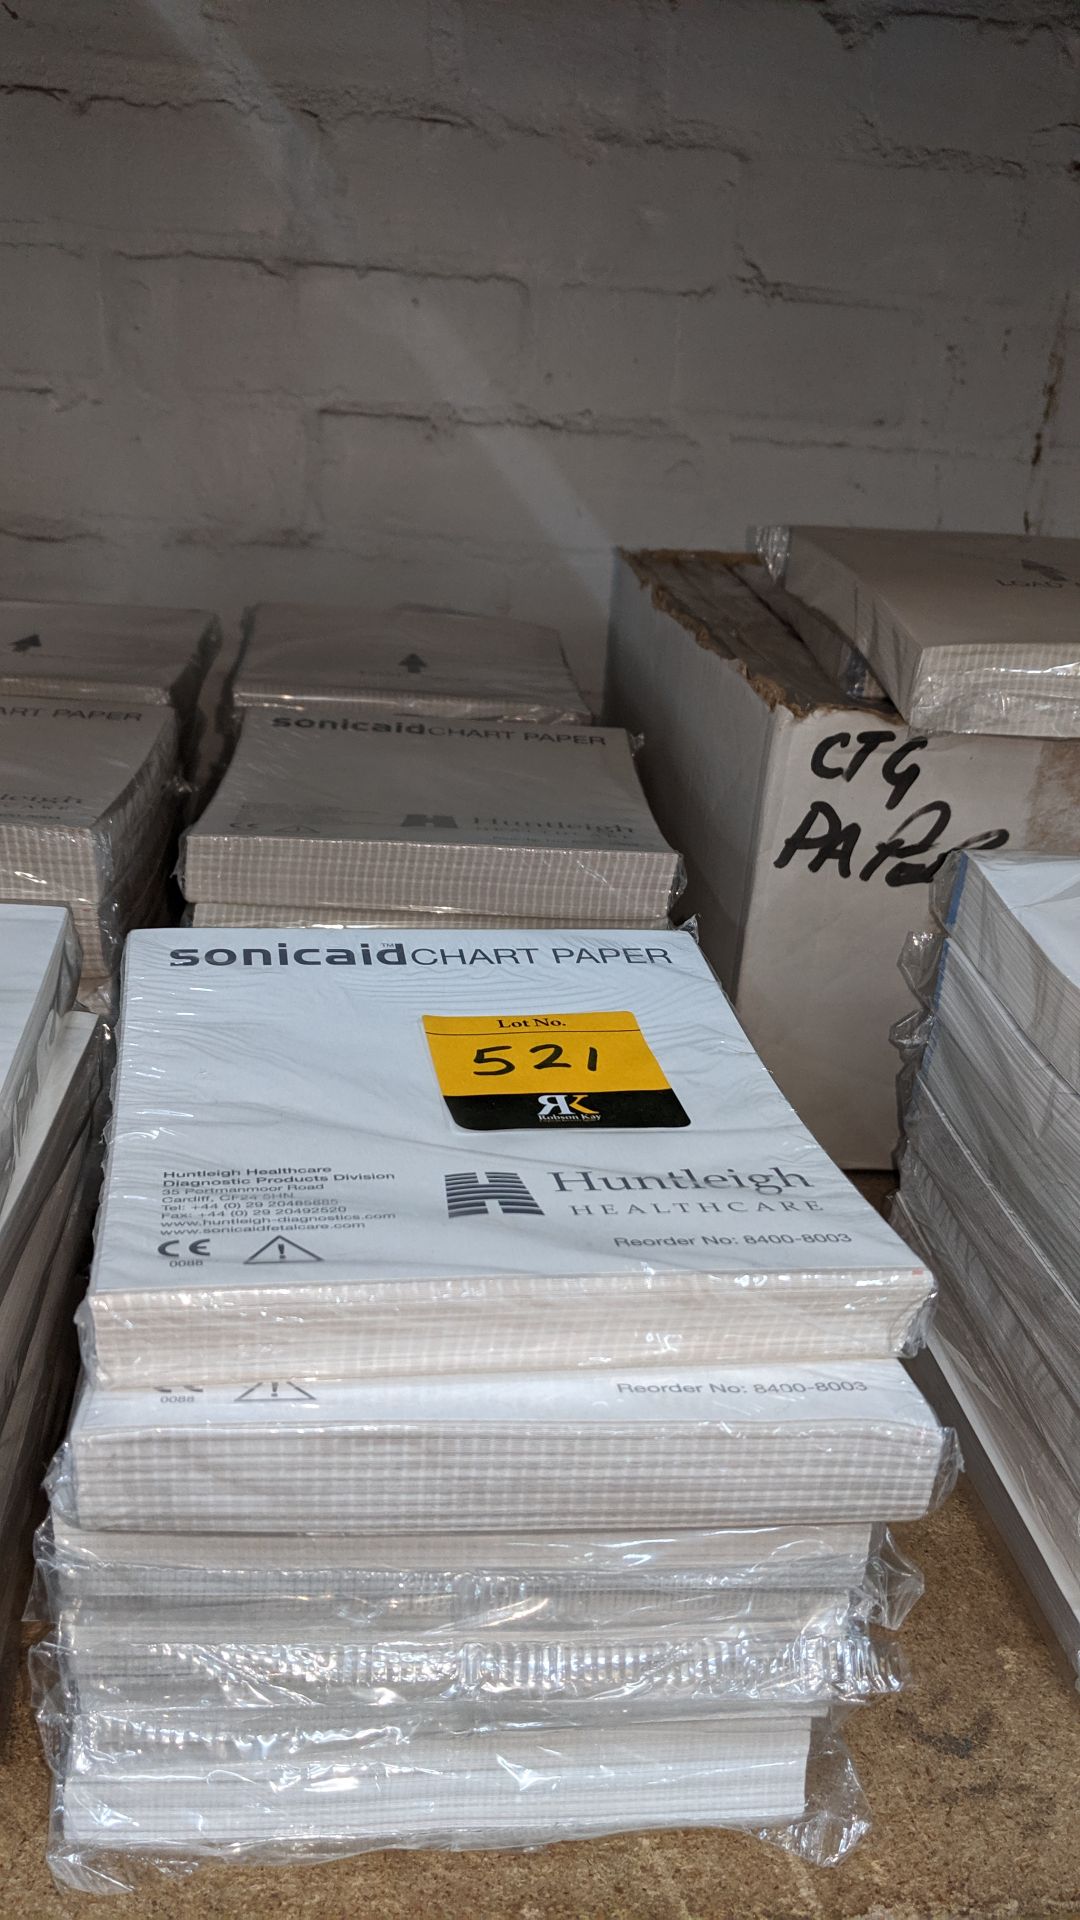 Row of Sonicaid chart paper. This is one of a large number of lots used/owned by One To One (North